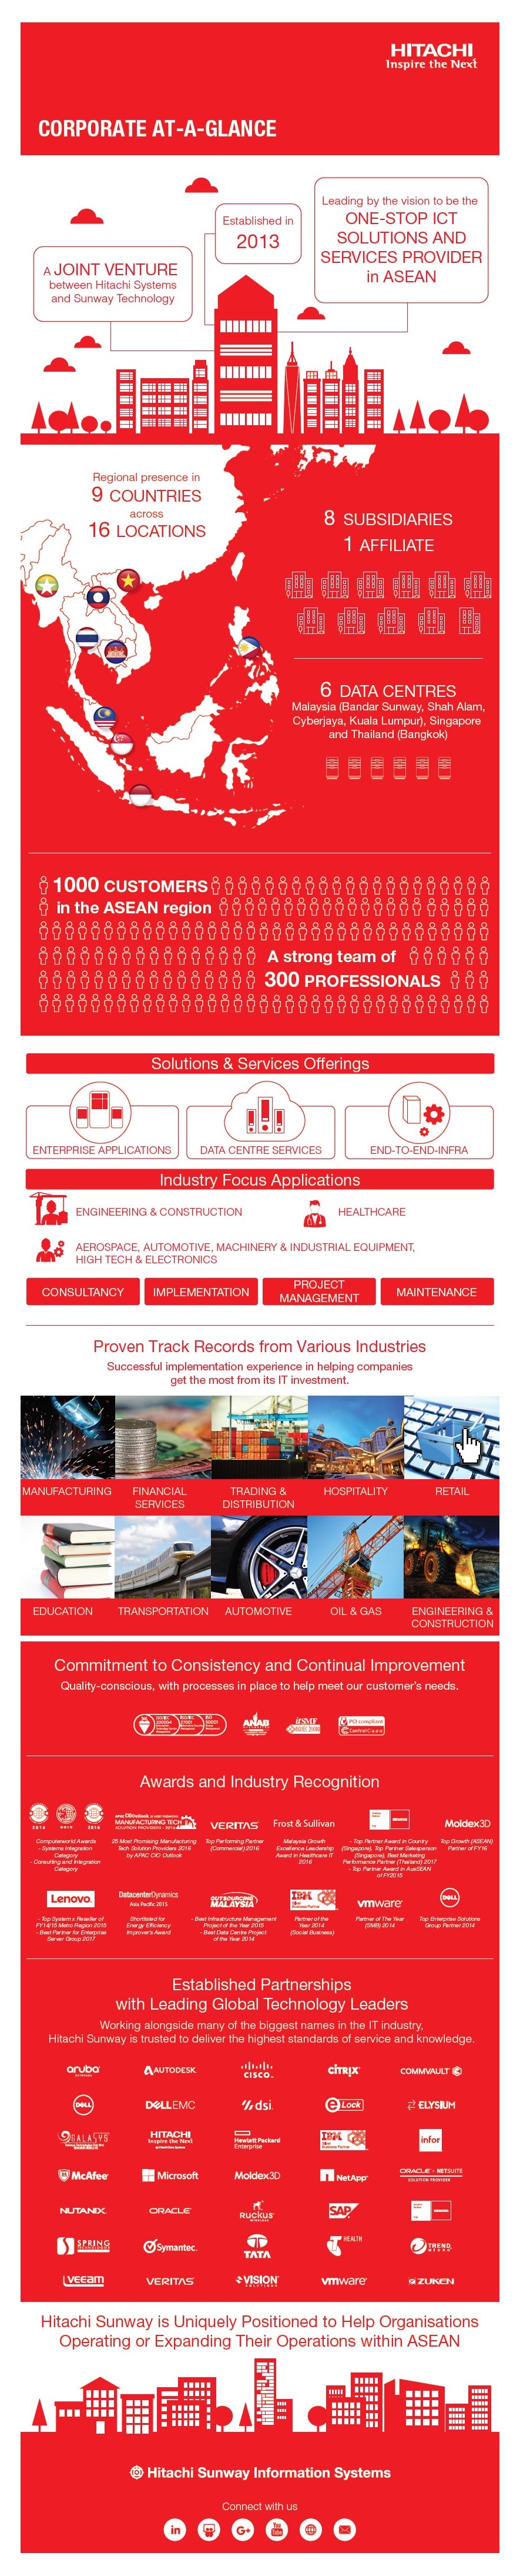 INFOGRAPHIC: Hitachi Sunway Corporate At-a-Glance